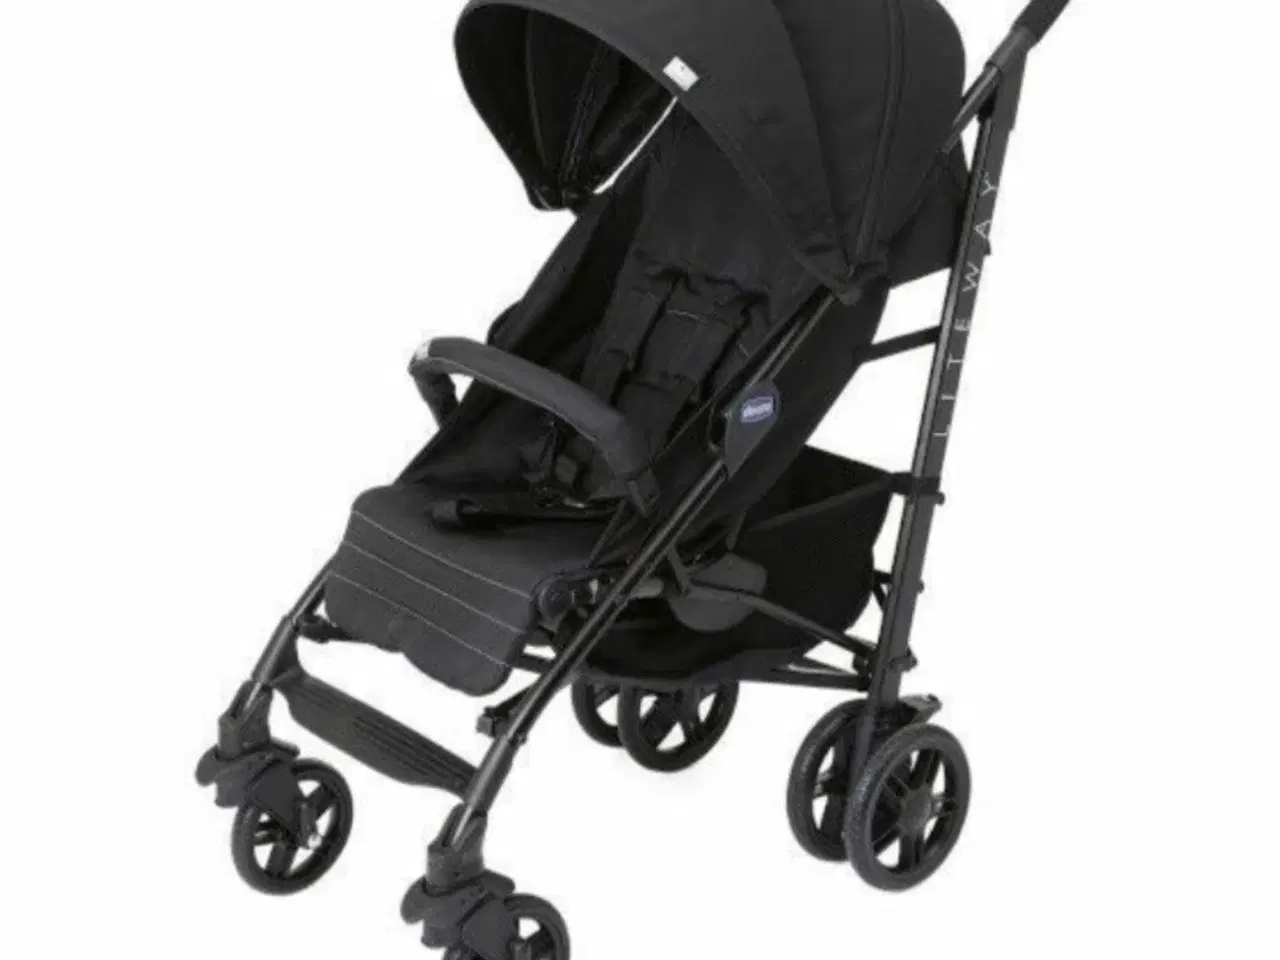 Billede 1 - STROLLER - CHICCO LITEWAY 4 it saves the day!